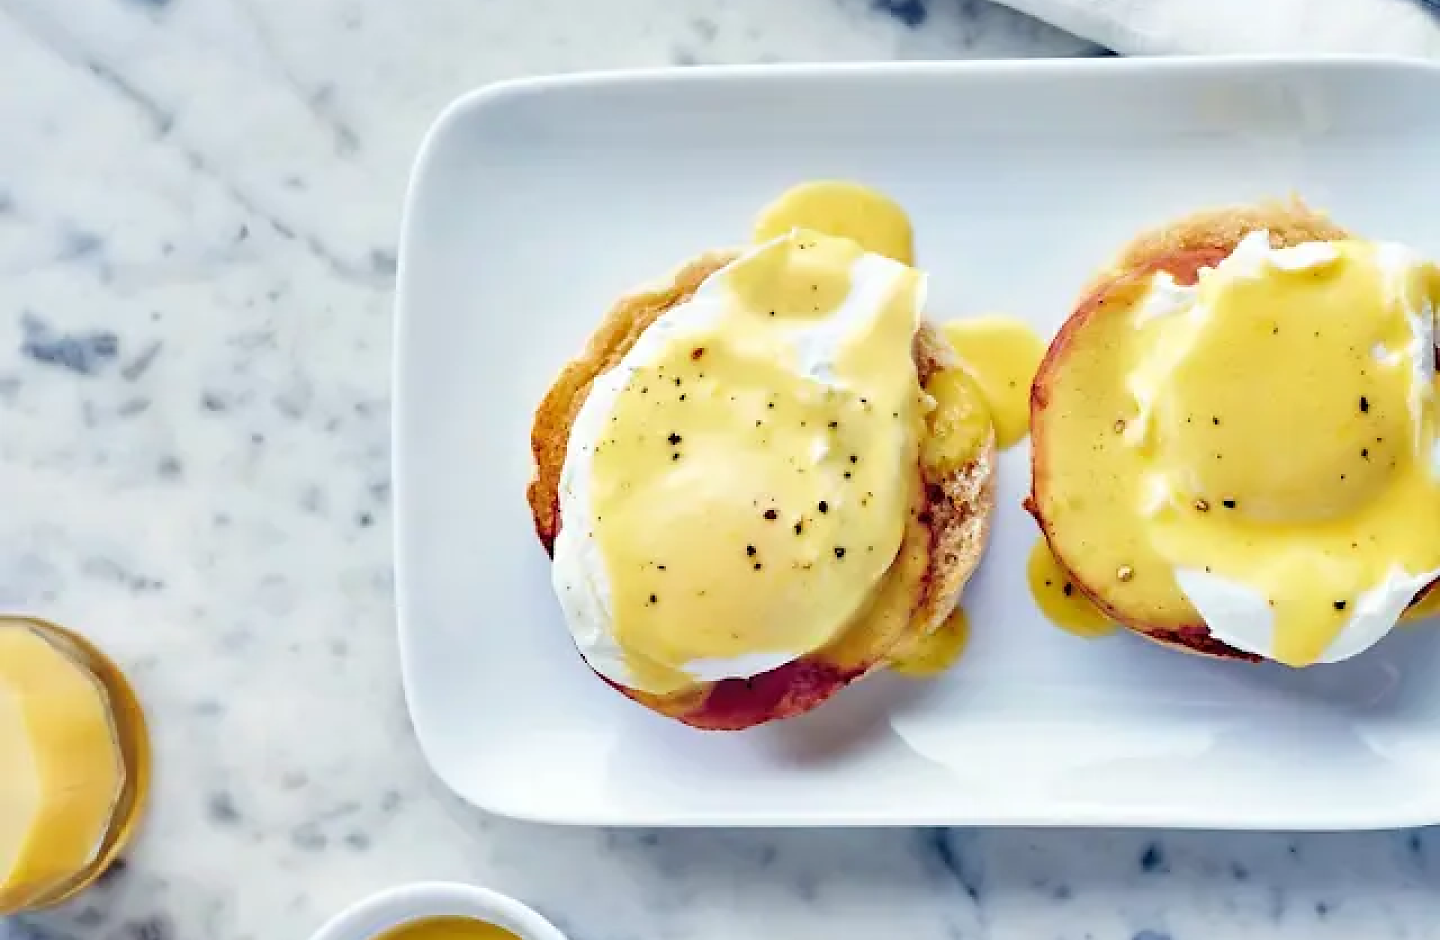 Plated eggs benedict